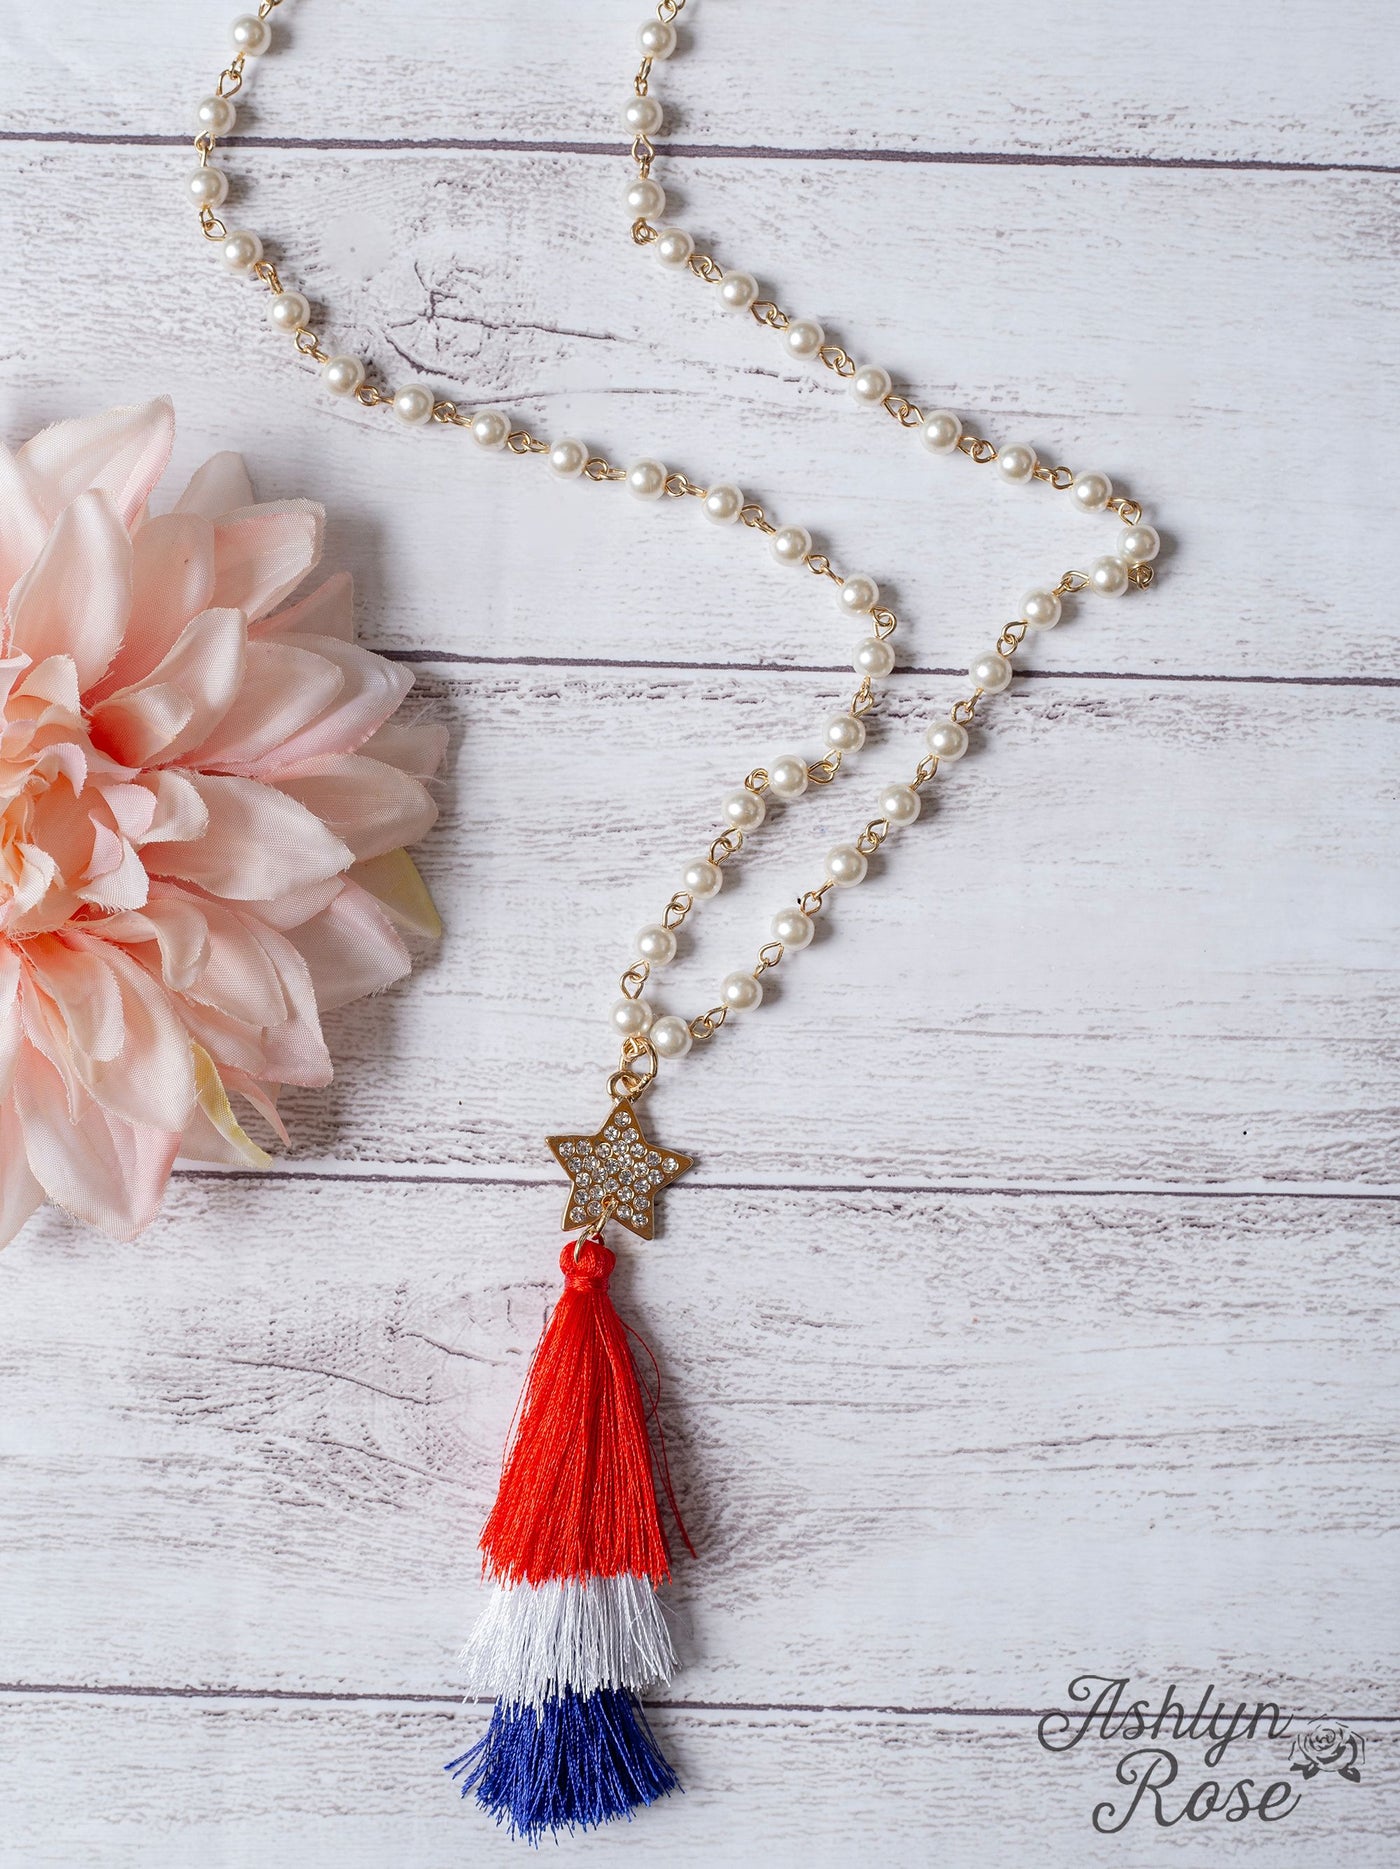 All-American Tassel Pendant on Pearl Chain Necklace